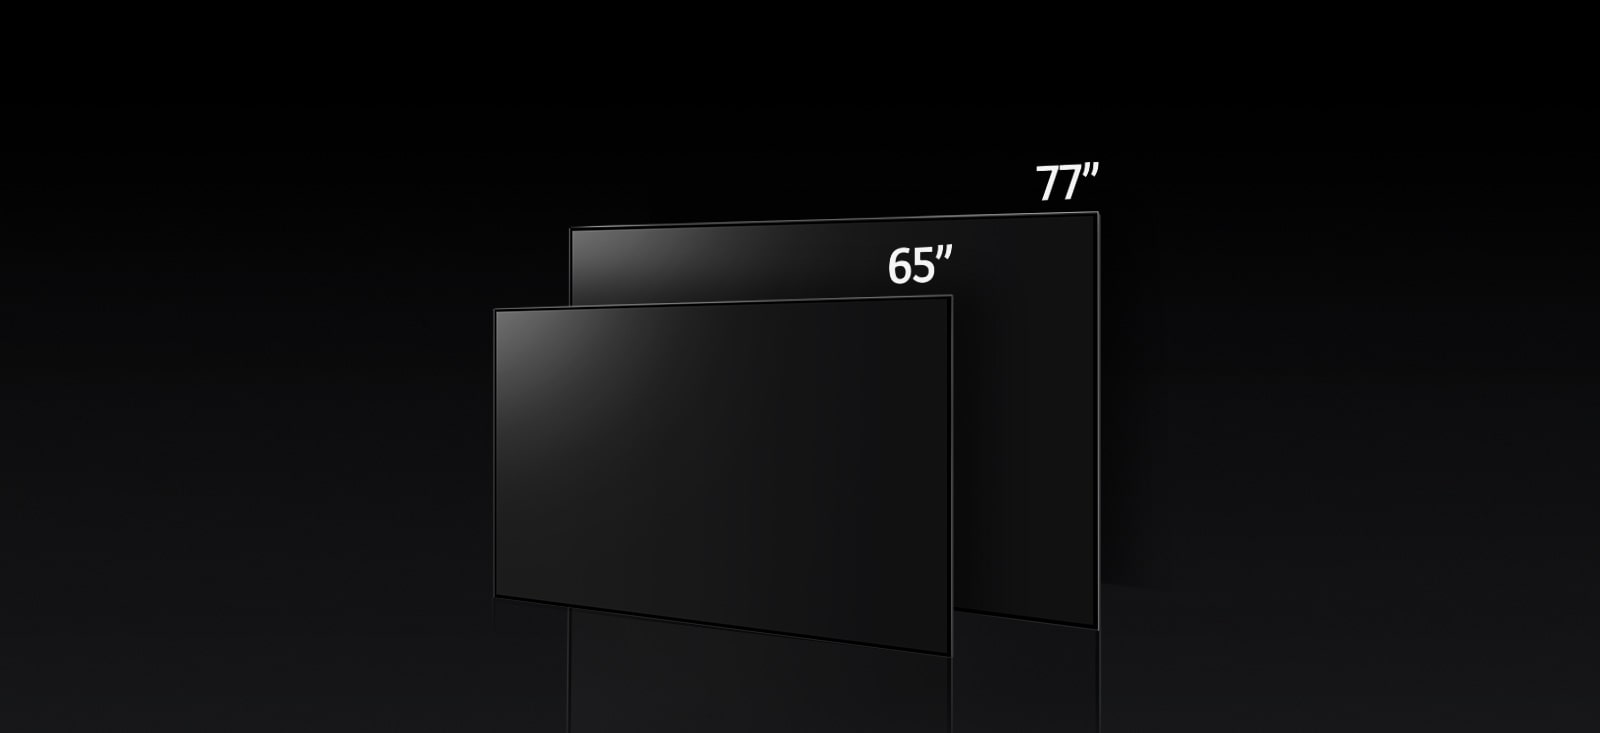 An image comparing LG OLED G3's varying sizes, showing 55", 65", 77", and 83".